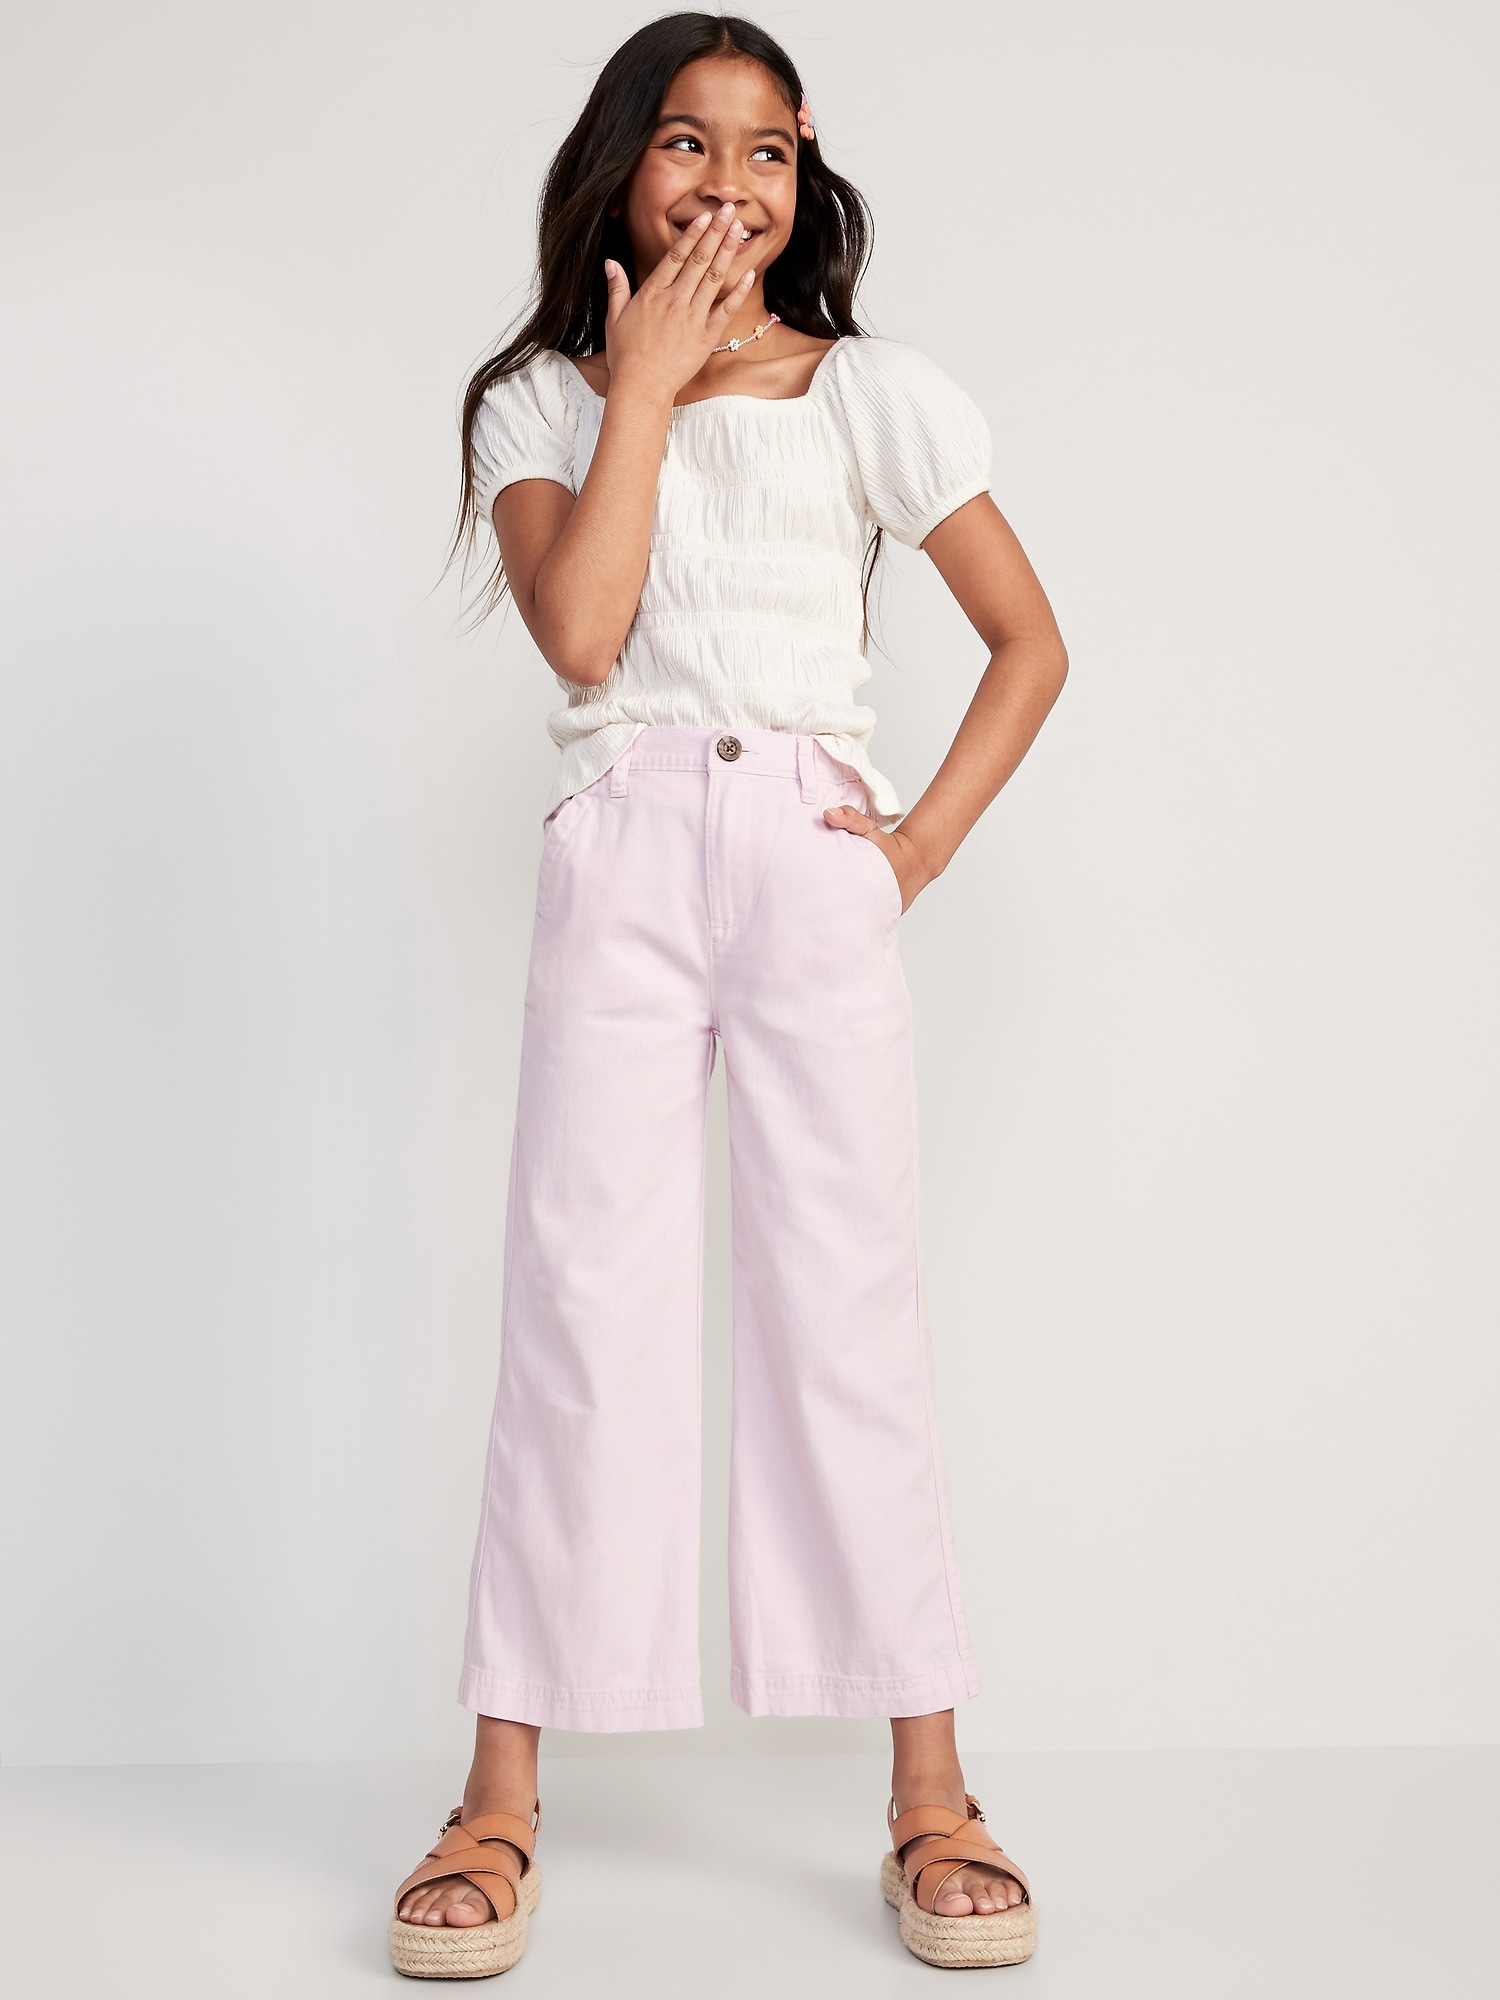 Pink d to d Plazzo Pants For Girls, Waist Size: 30.0, Yes